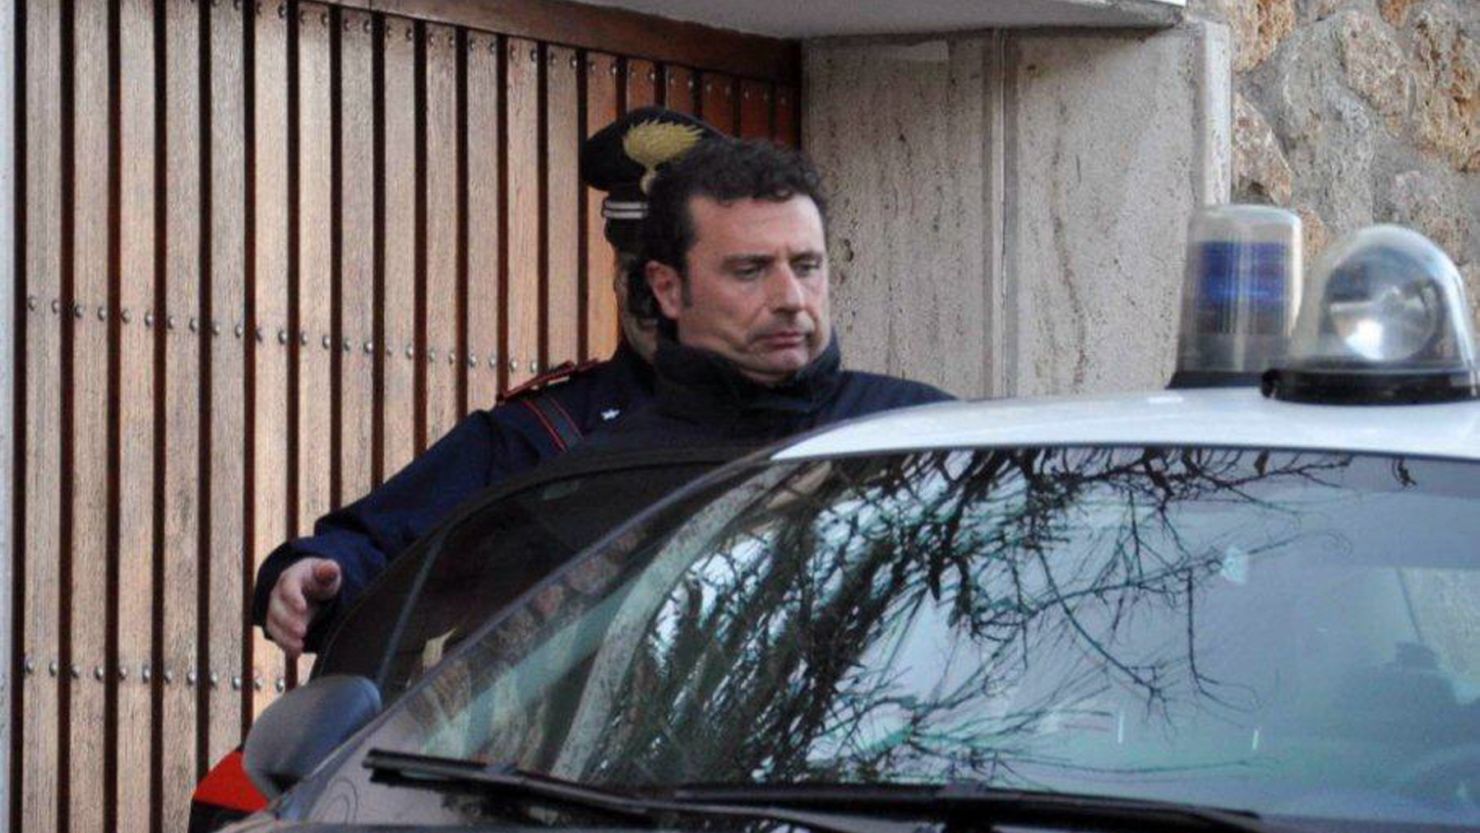 The captain of the Costa Concordia cruise liner Francesco Schettino faces possible charges of manslaughter.